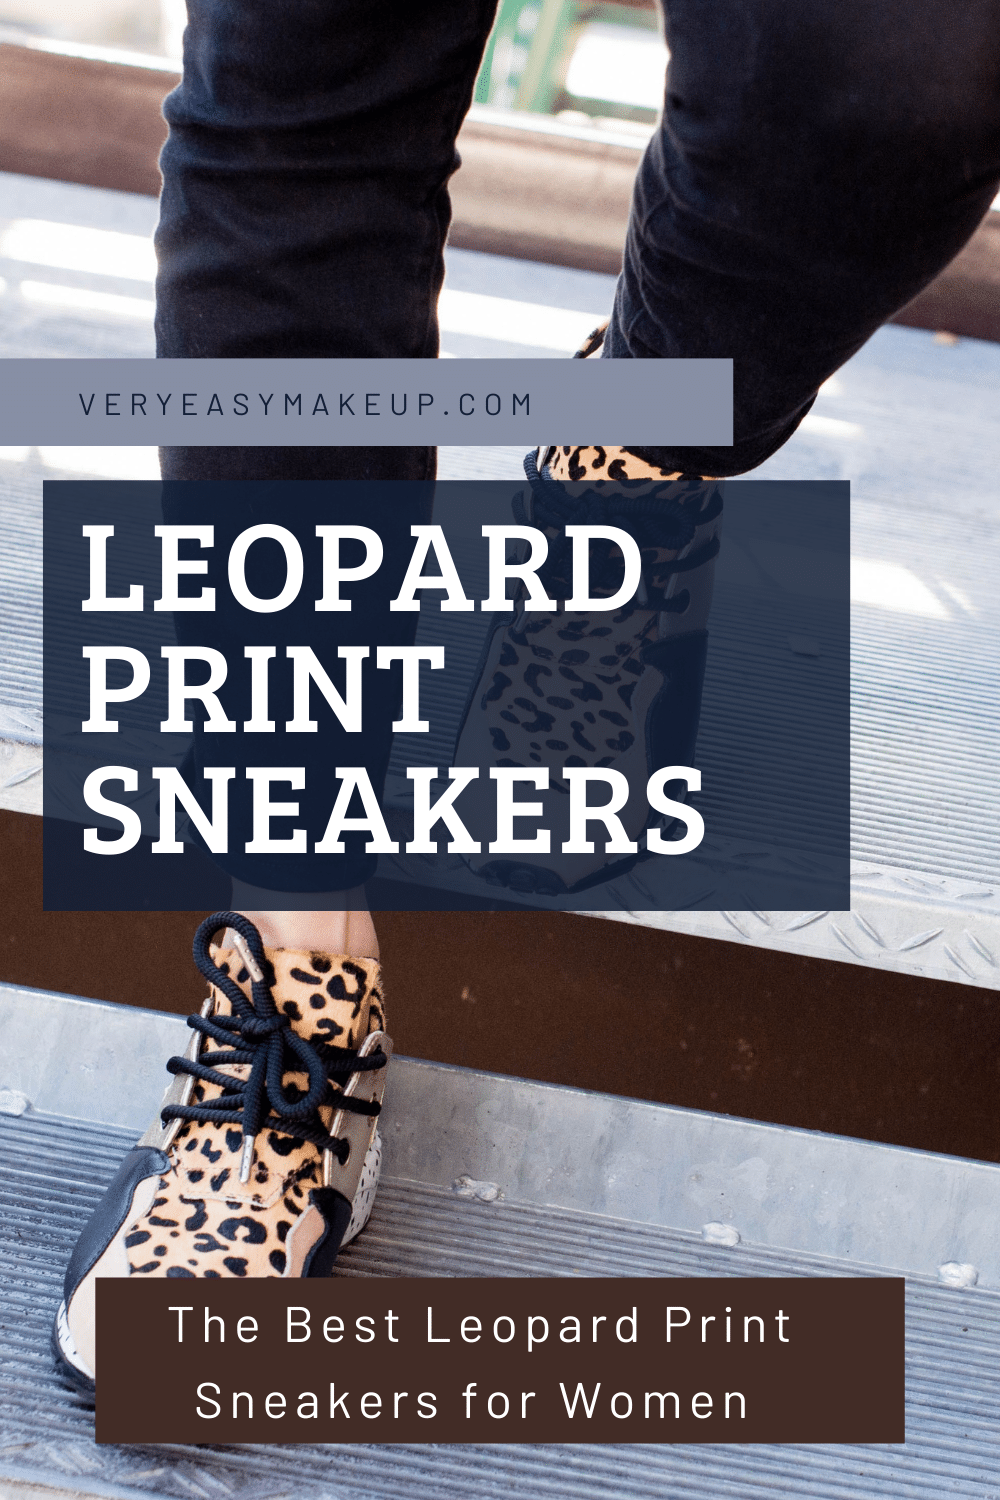 The Best Leopard Print Sneakers by Very Easy Makeup